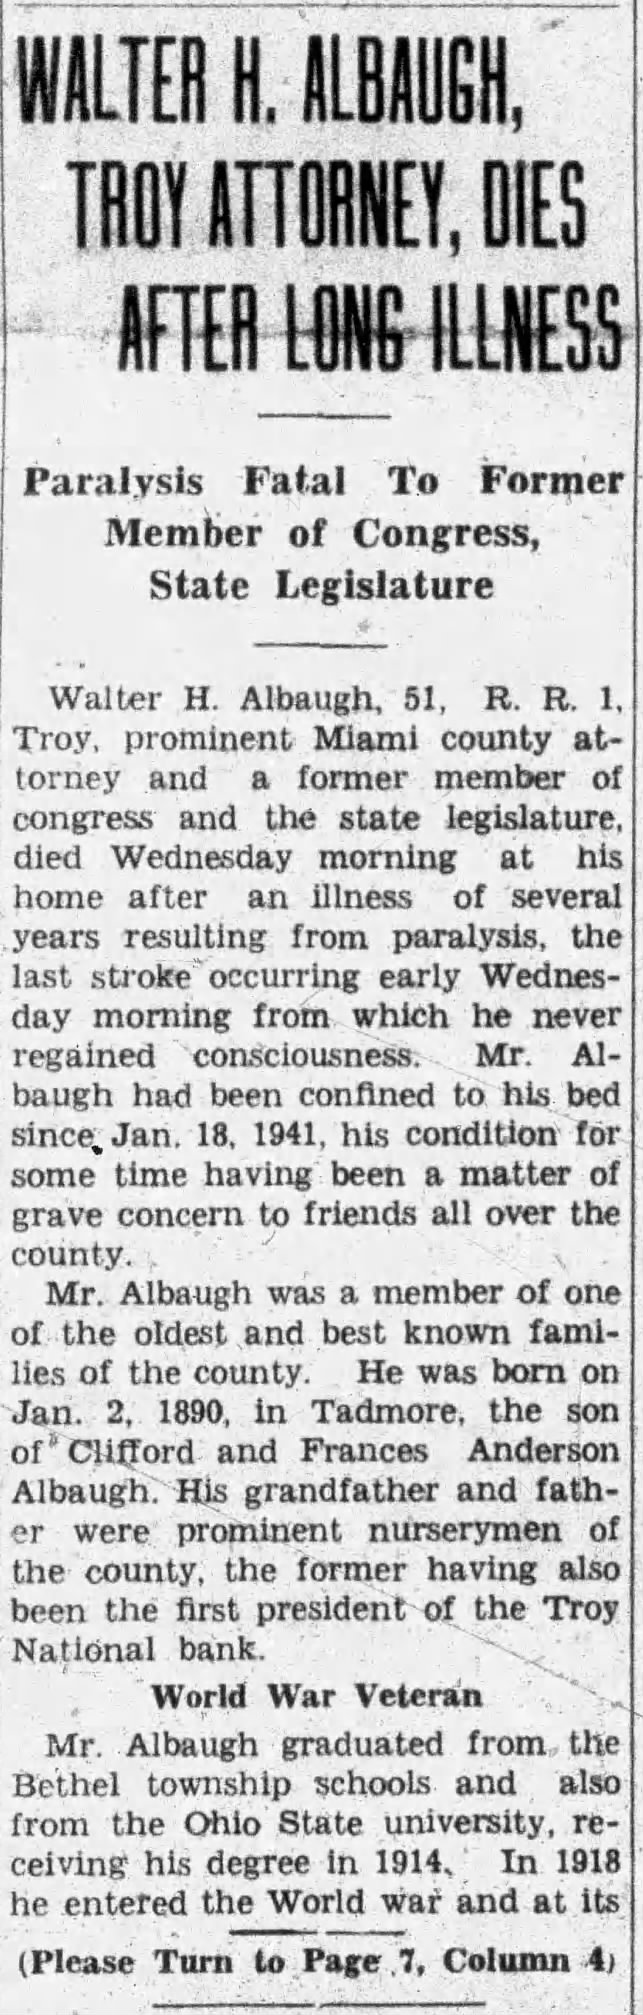 Walter H. Albaugh, Troy Attorney, Dies After Long Illness; 21 Jan 1942; Troy Daily News; 1